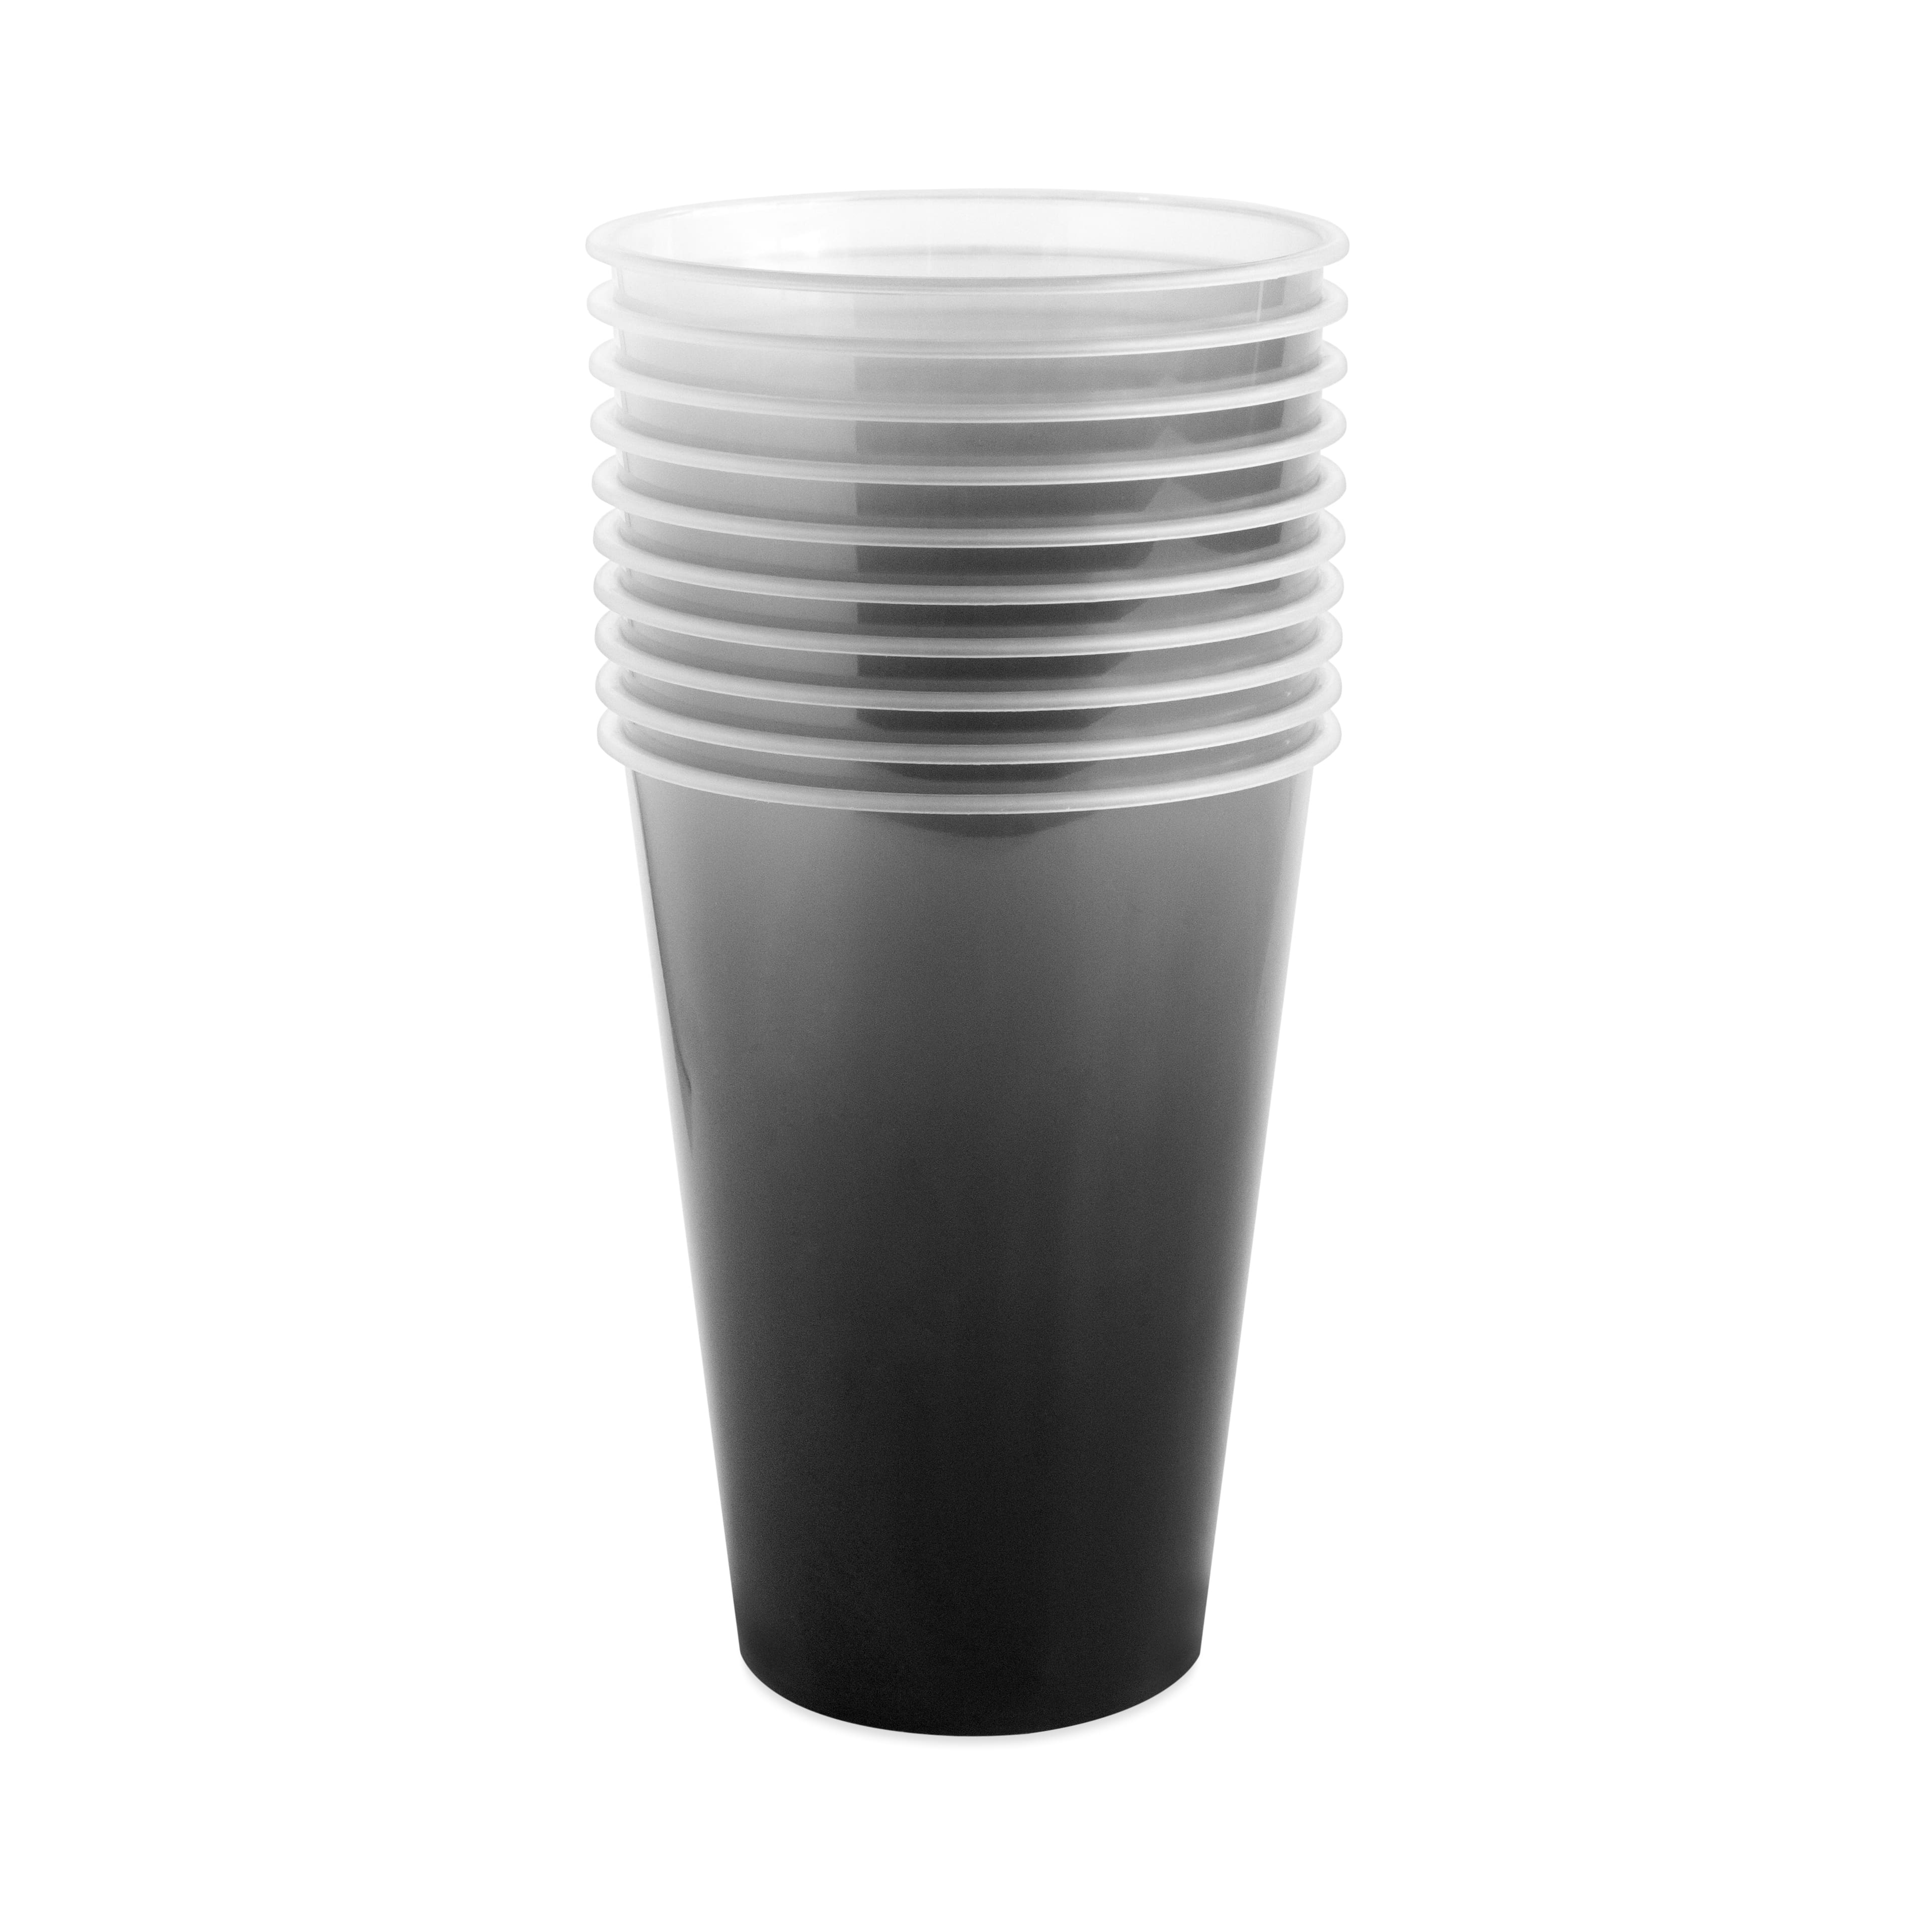 12 Packs: 10 ct. (120 total) 12oz. Ombre Plastic Cups by Celebrate It&#xAE;